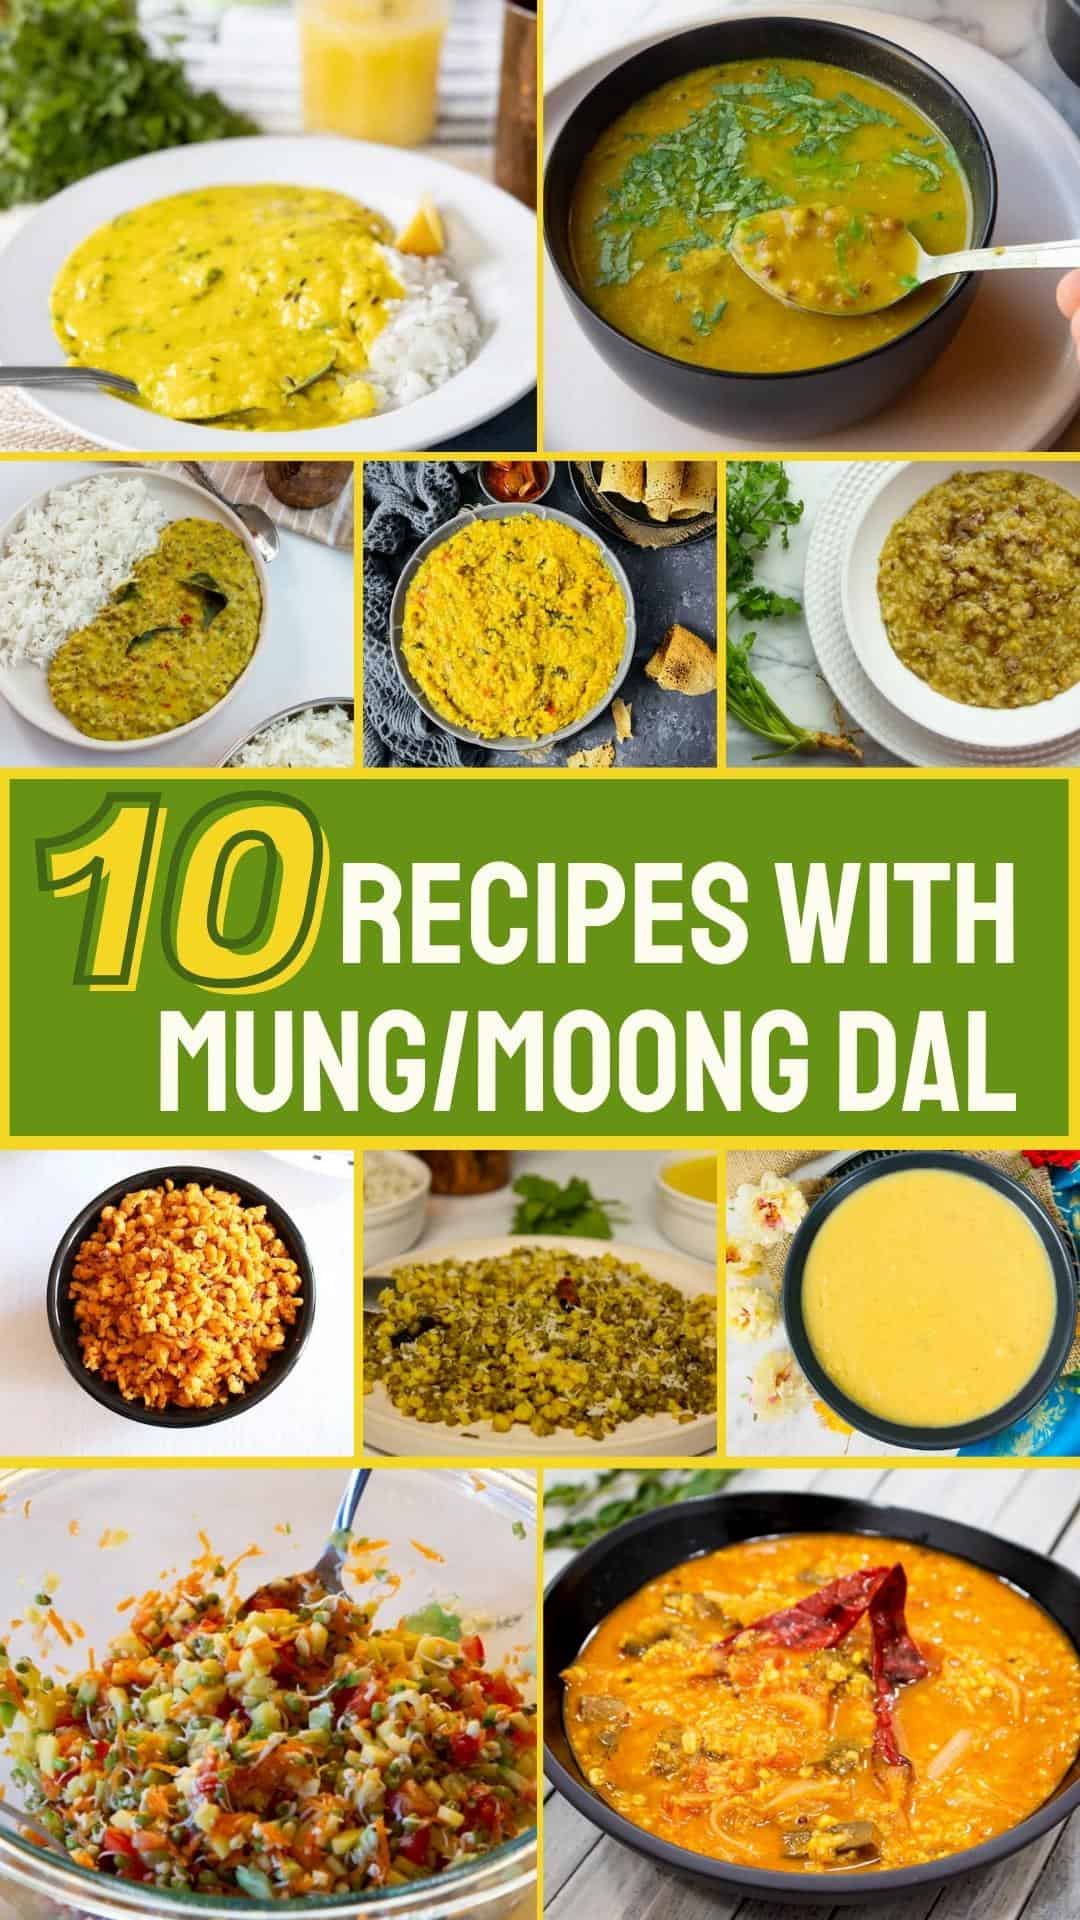 10 Vegetarian Recipes with Moong Dal